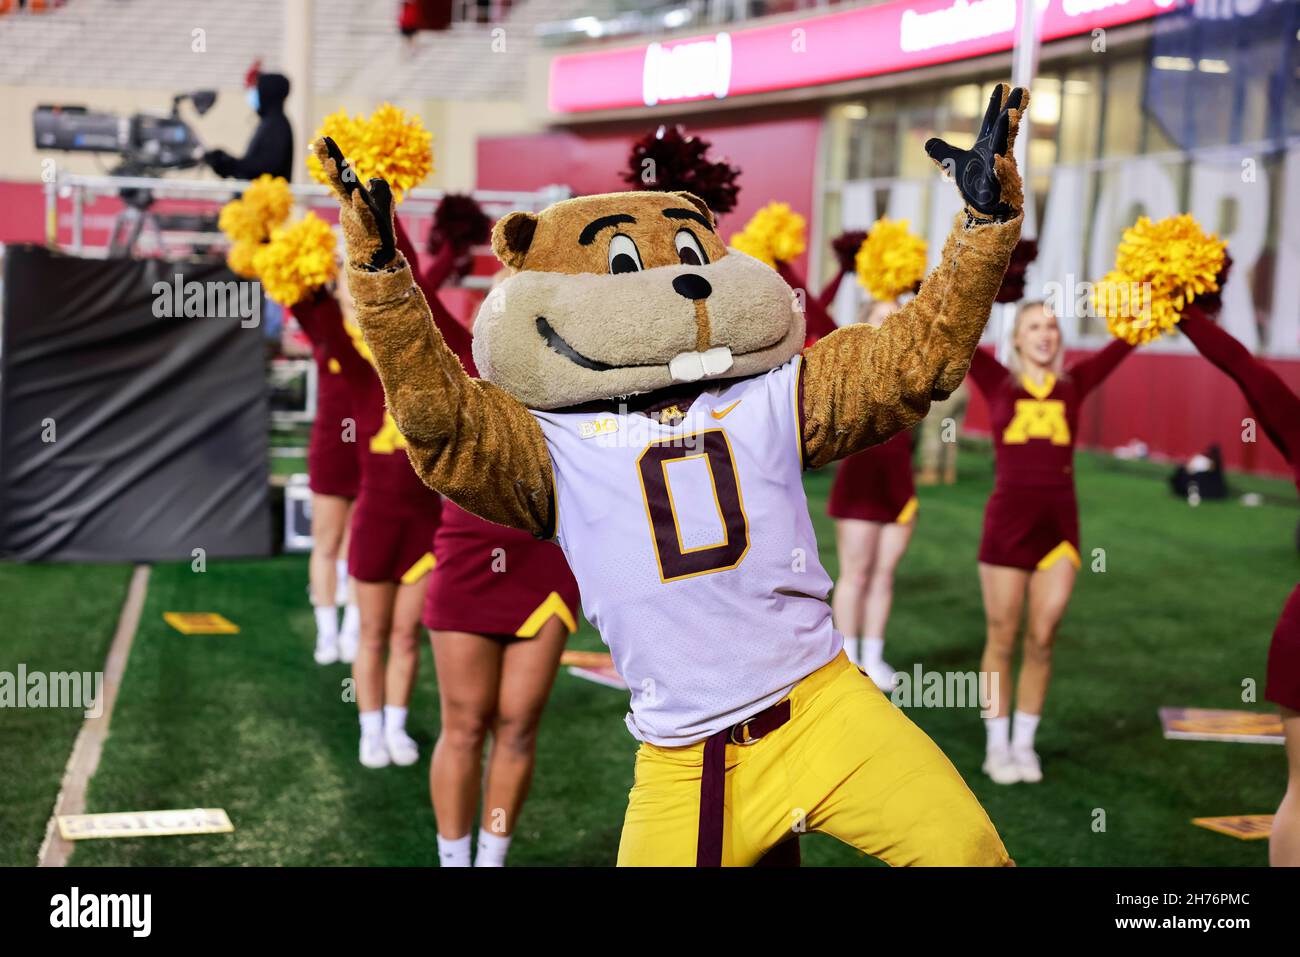 BLOOMINGTON, UNITED STATES - 2021/11/20: Minnesota’s cheerleaders and mascot, Goldy, cheer against Indiana University during an NCAA football game on November 20, 2021 at Memorial Stadium in Bloomington, Ind. IU lost to Minnesota 35-14. Stock Photo